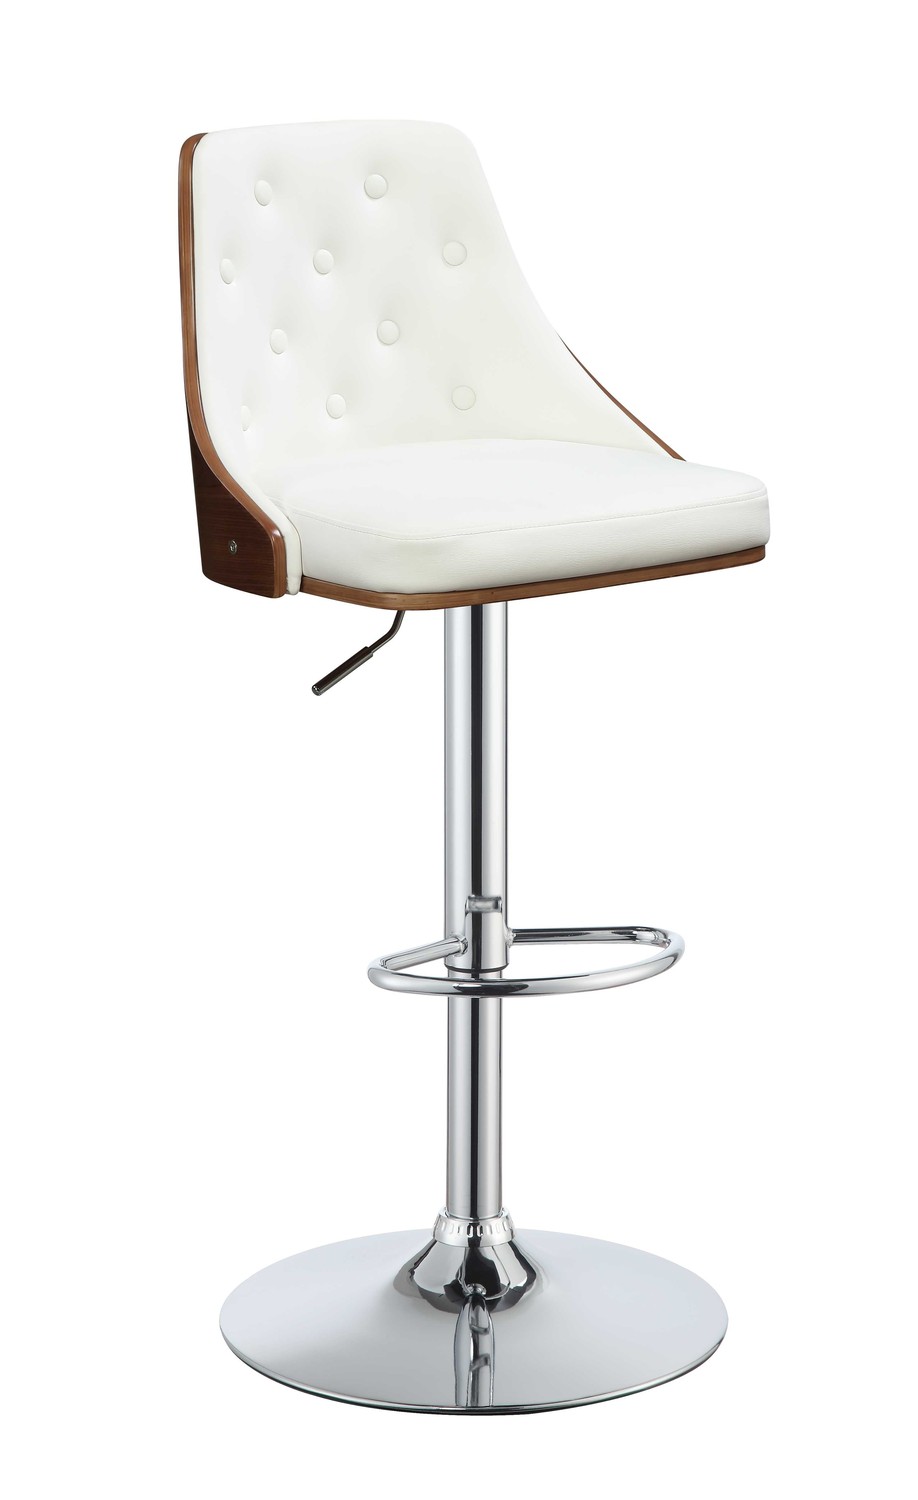 33" Cream White Faux Leather Adjustable Swivel Bar Stool with Metal Base